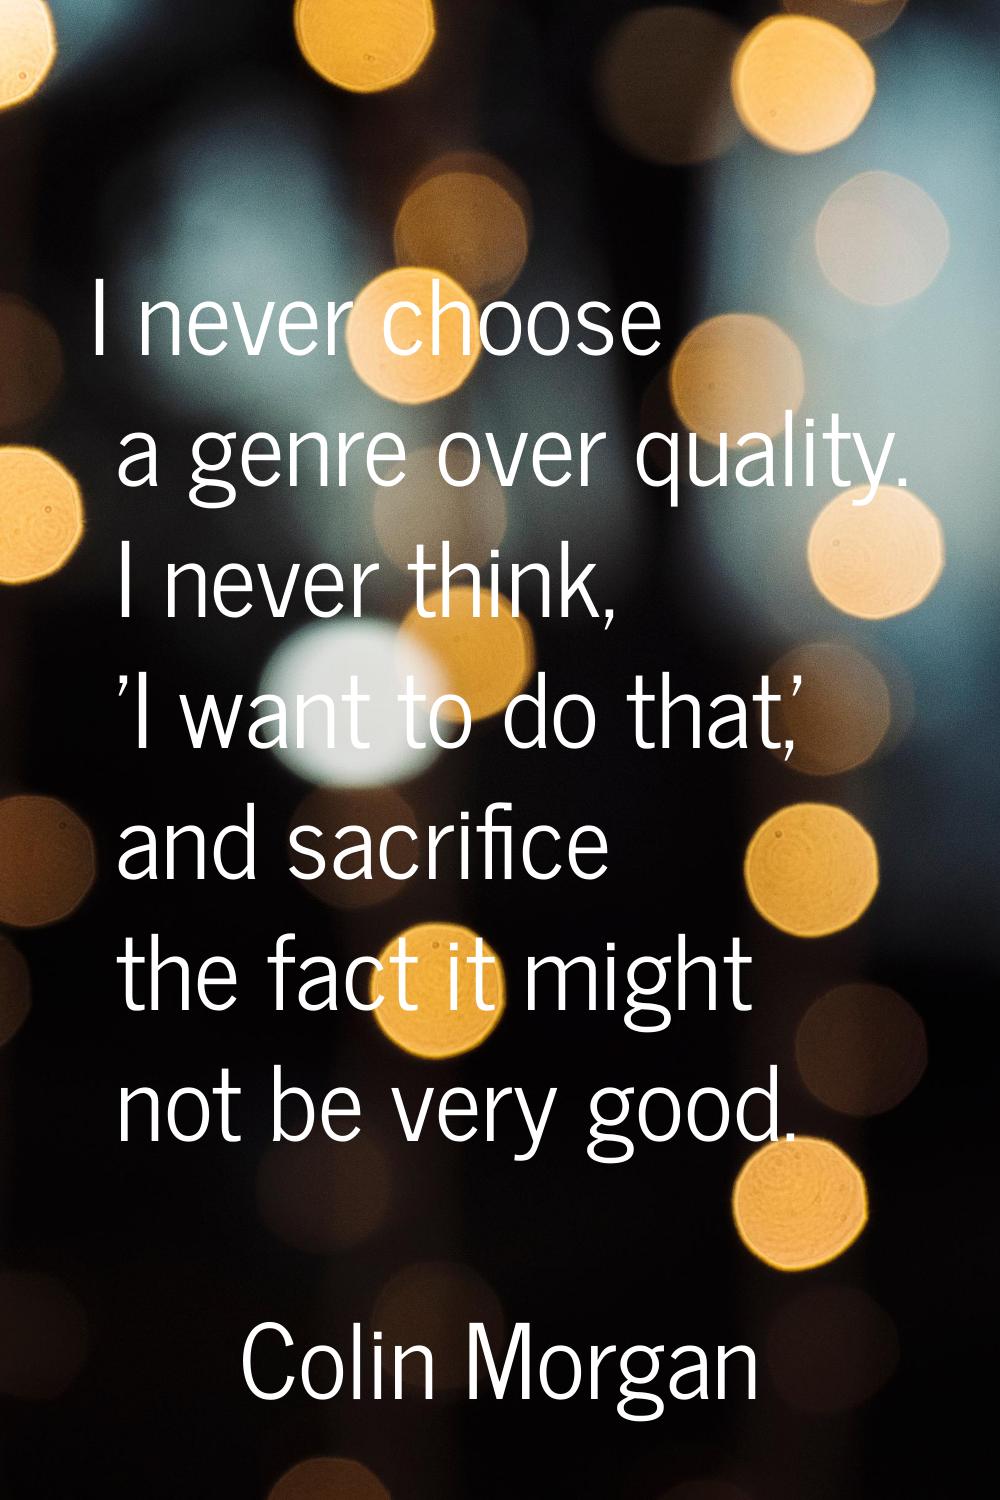 I never choose a genre over quality. I never think, 'I want to do that,' and sacrifice the fact it 